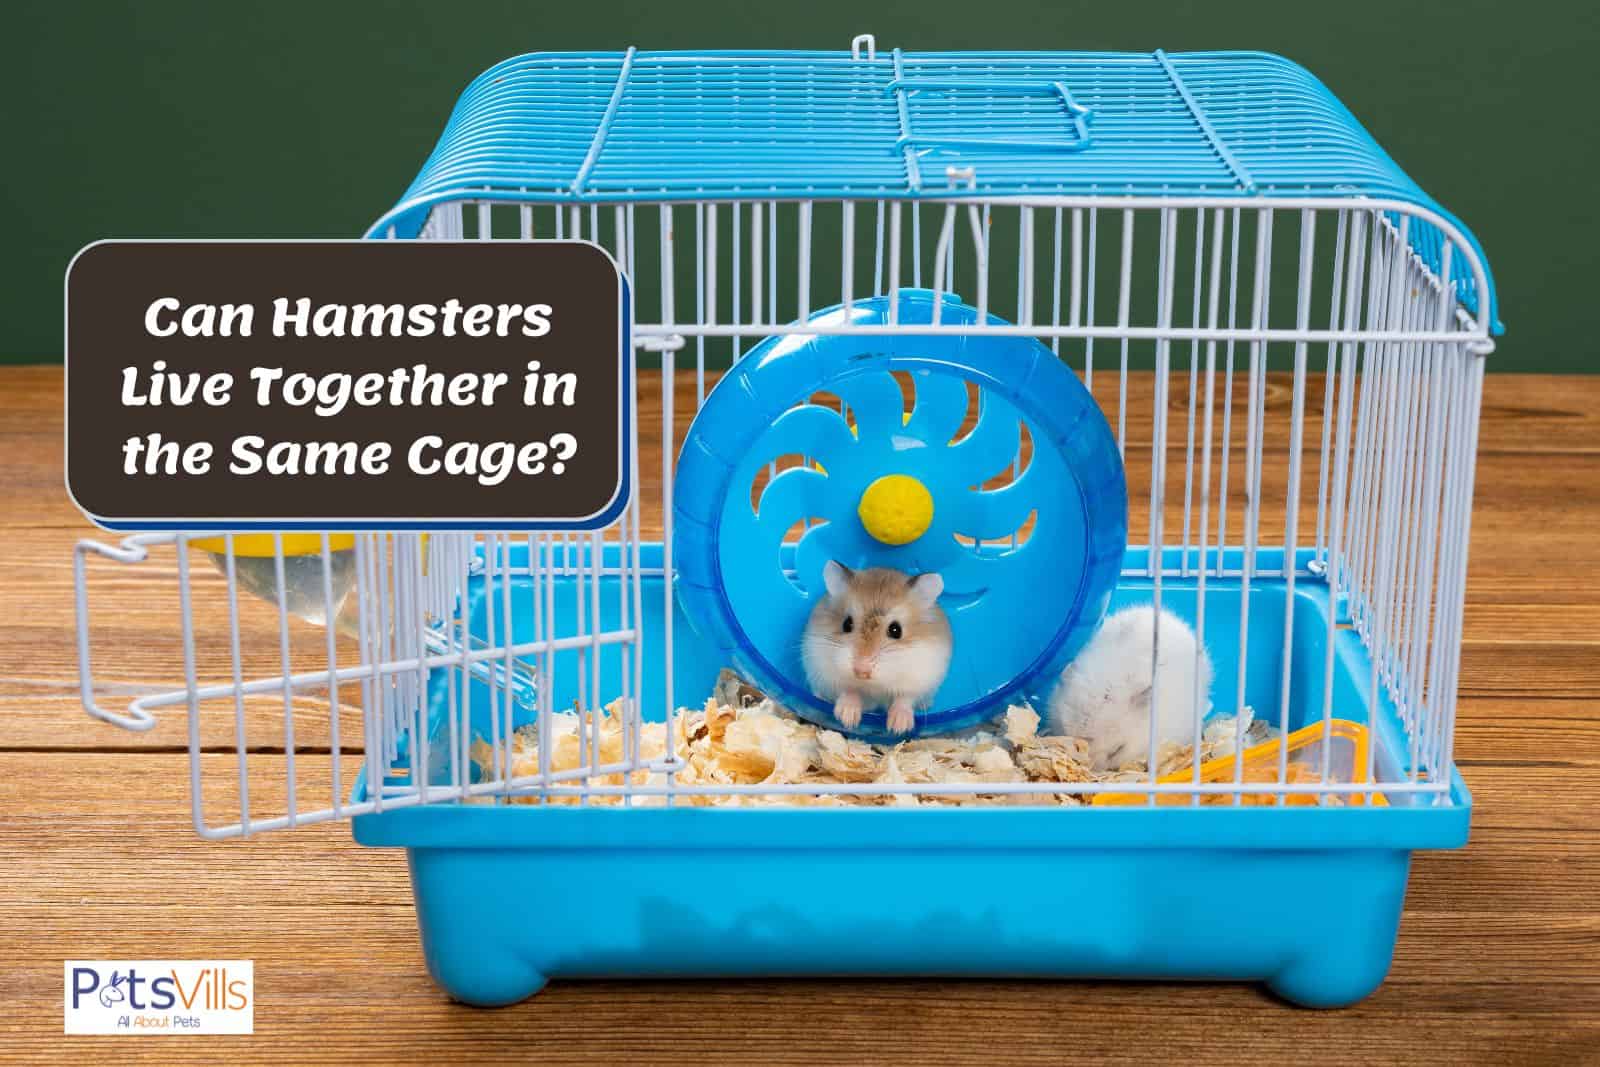 Can Hamsters Live Together in the Same Cage